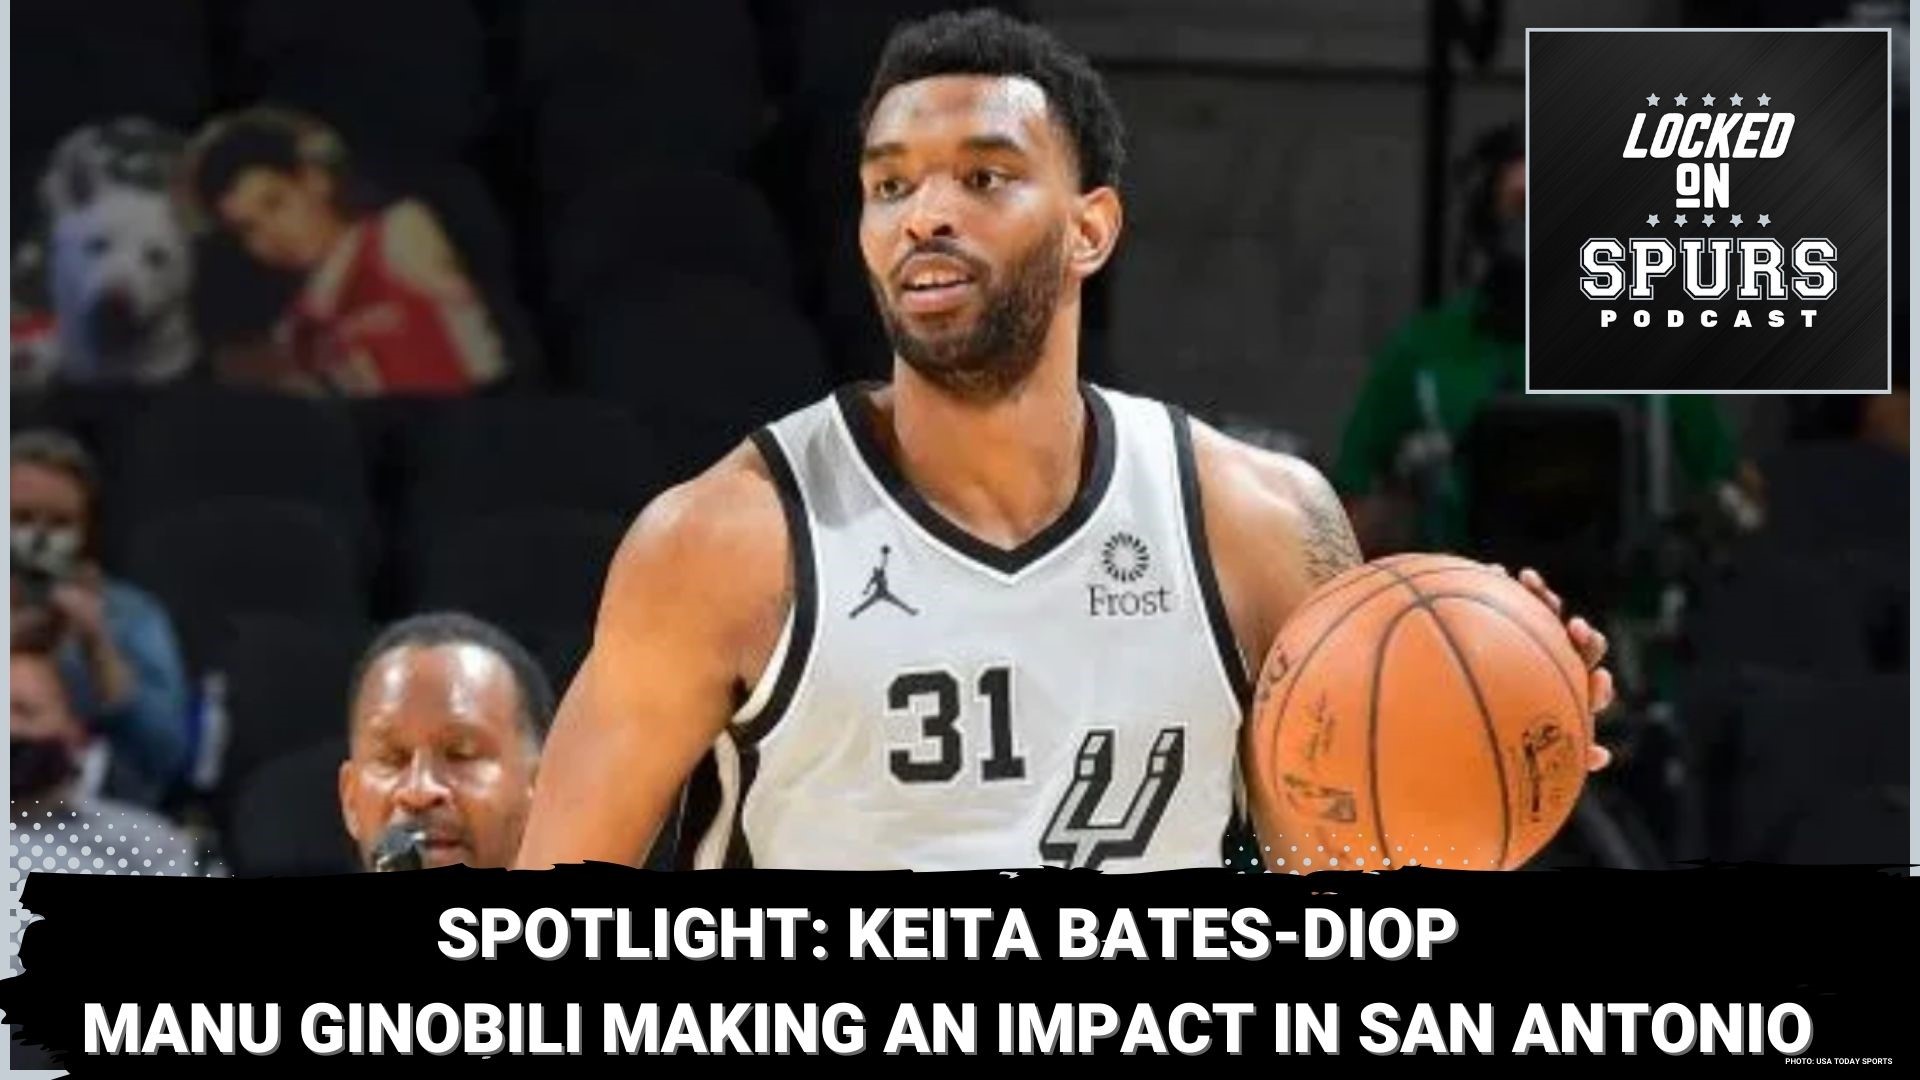 Should the Spurs re-sign Bates-Diop or not?